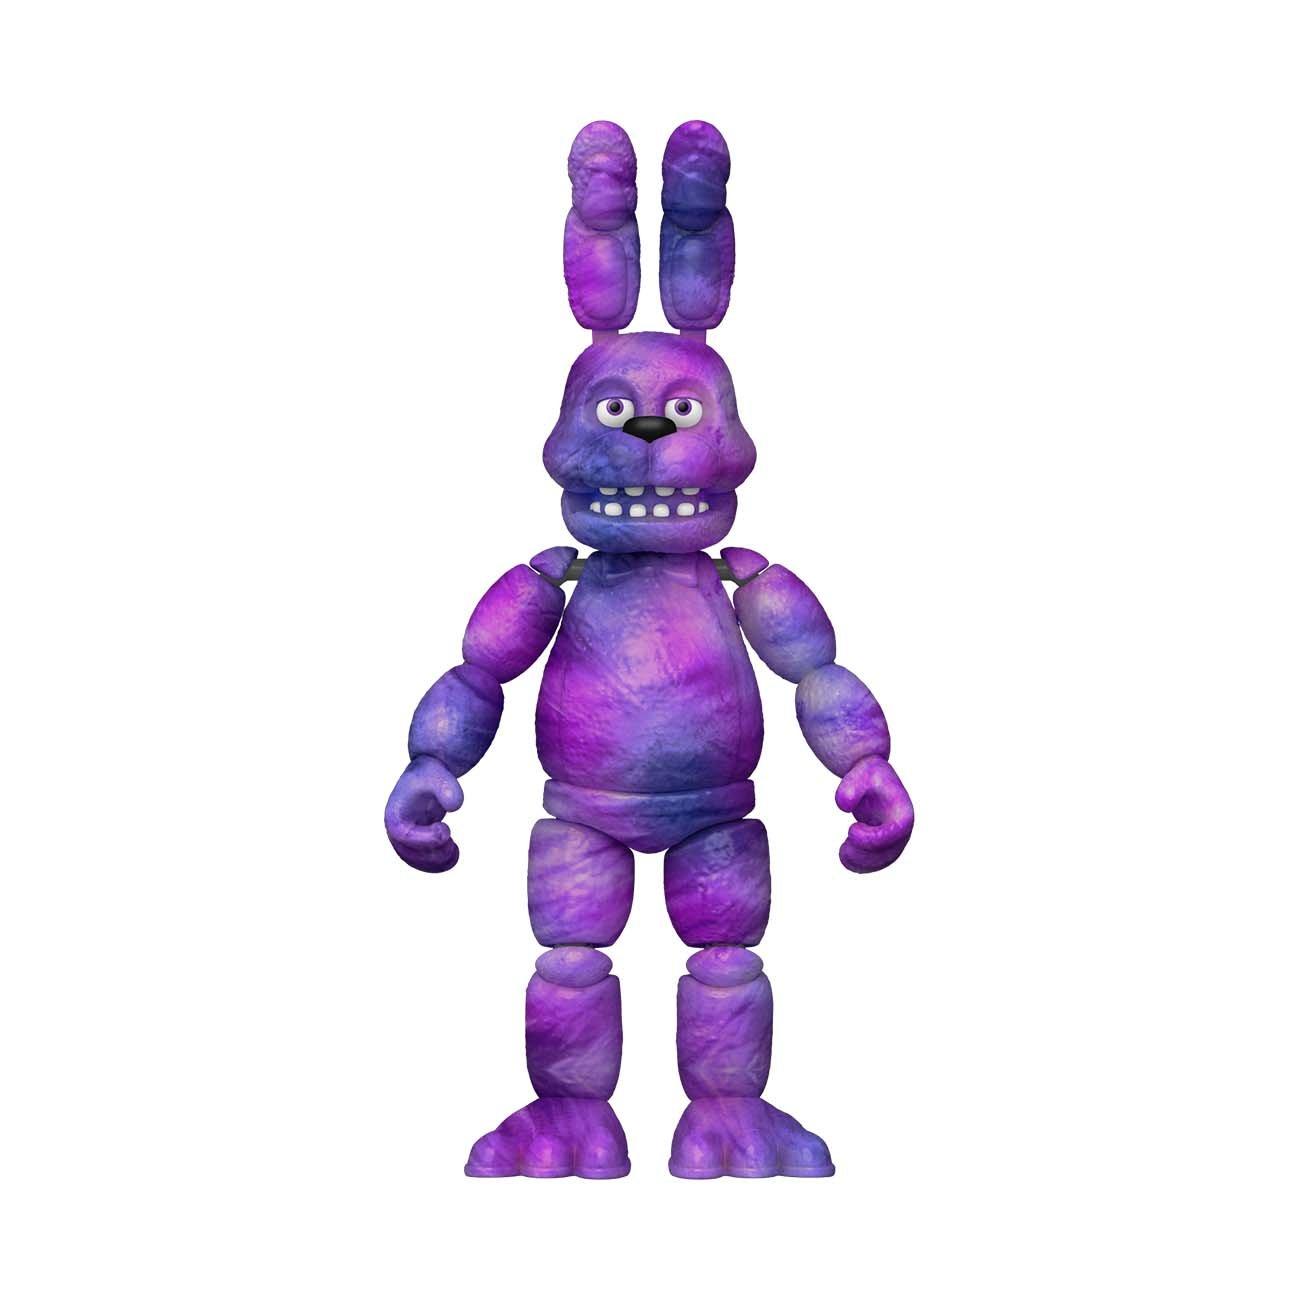  FUNKO ACTION FIGURE: Five Nights at Freddy's Tie-Dye - Freddy :  Clothing, Shoes & Jewelry